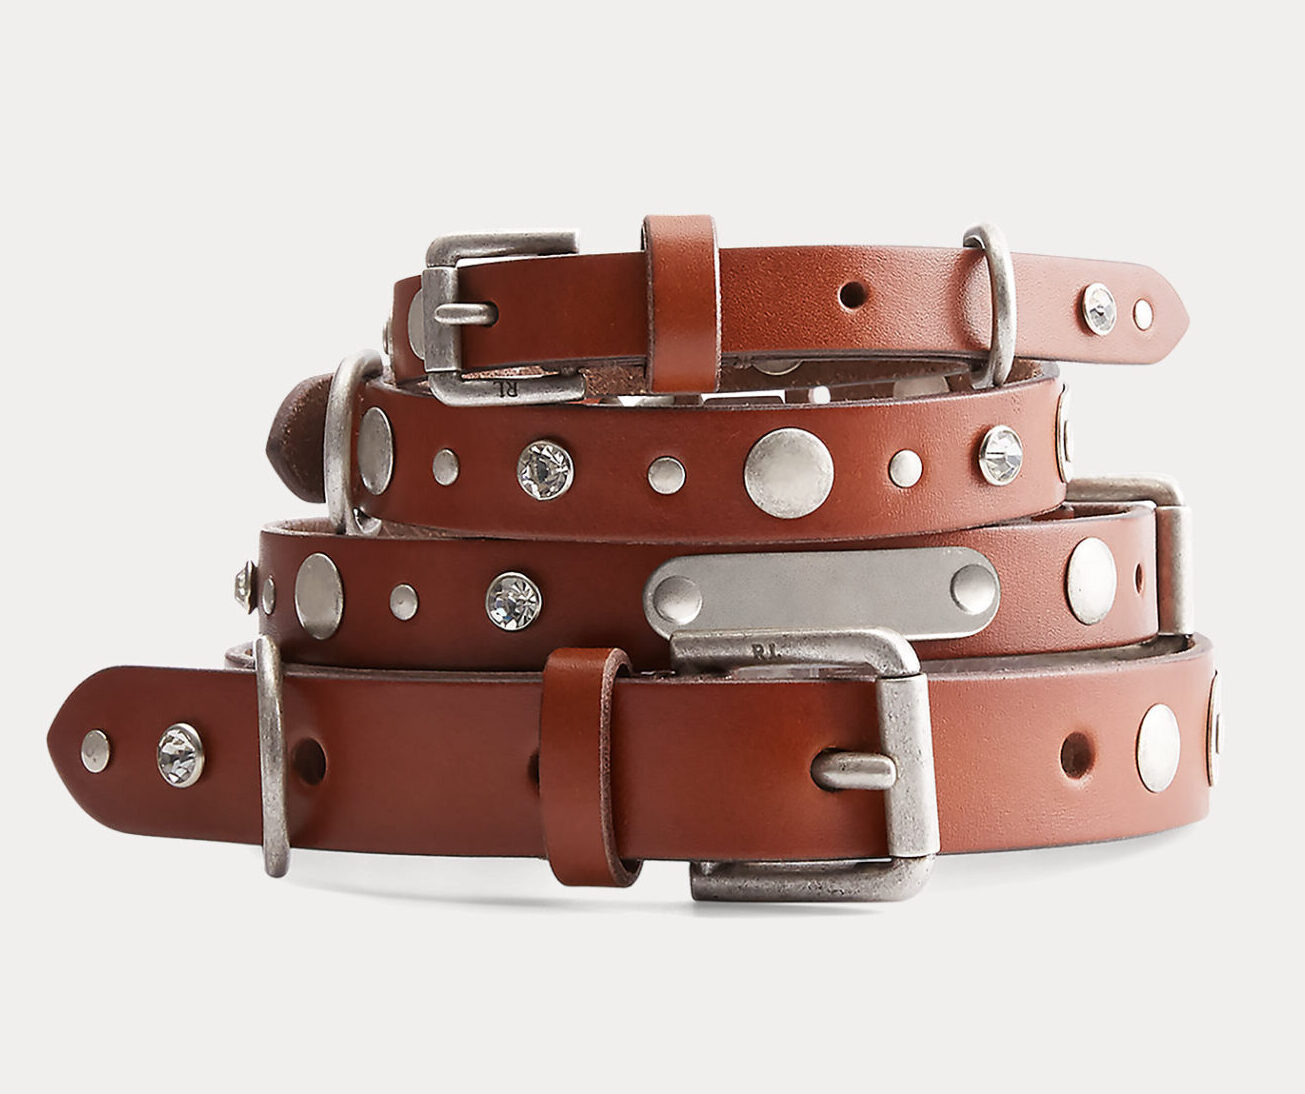 Chic designer dog collars to shop for your pup: RALPH LAUREN Wylie Leather Dog Collar